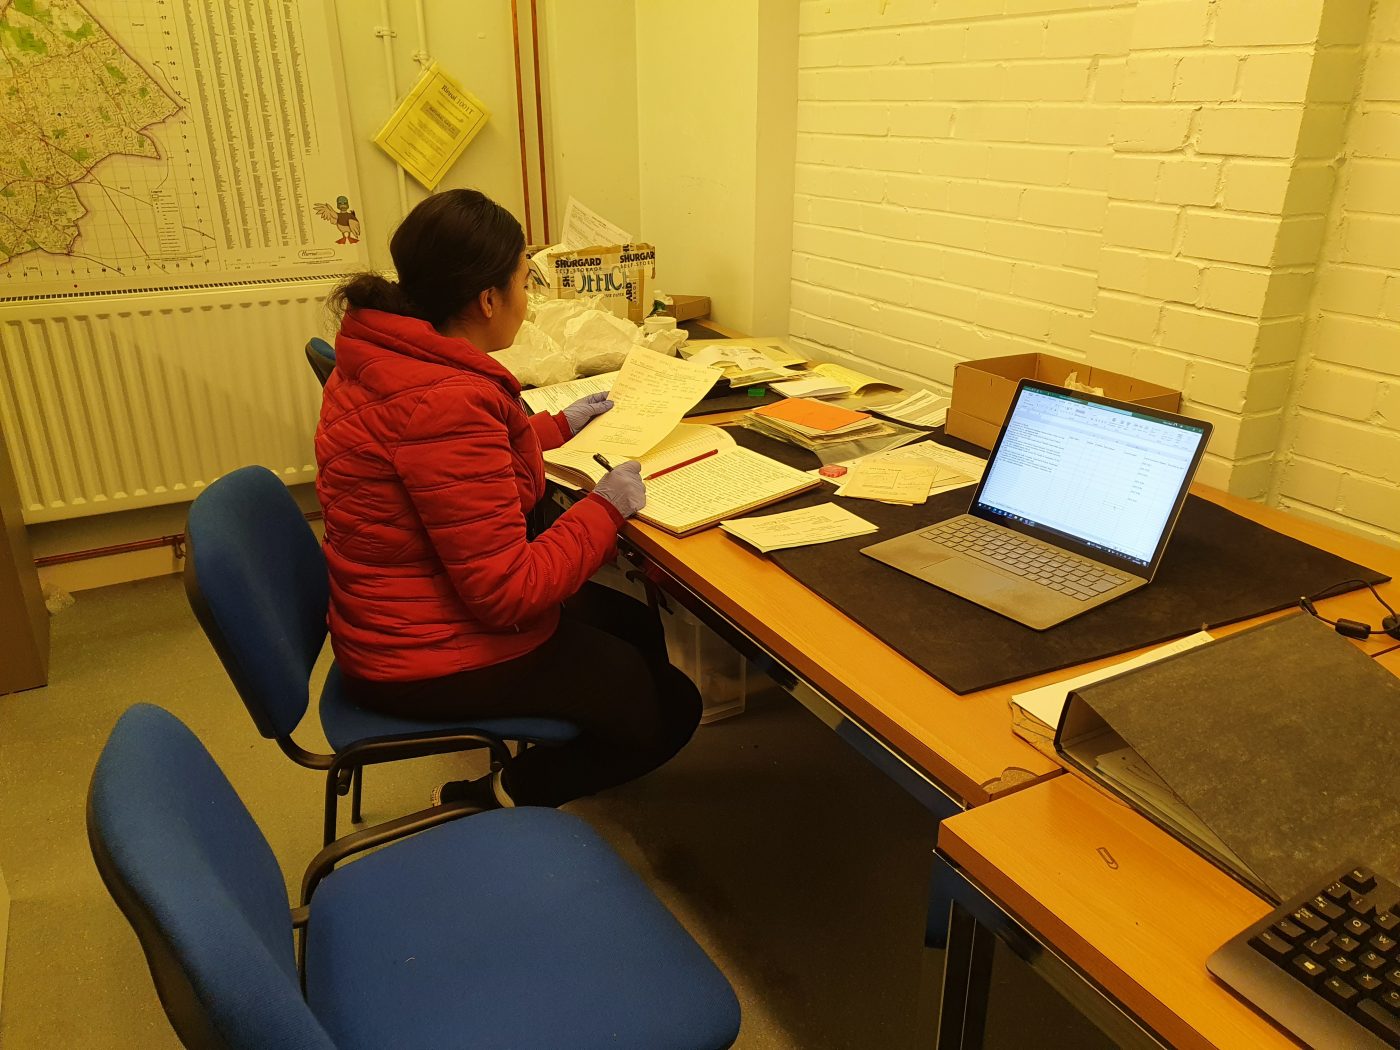 A woman sitting down wearing a red jacket sitting on a blue chair. The woman is holding an archival document and recording the data in a book. The woman is a room with other archival documents and a laptop.